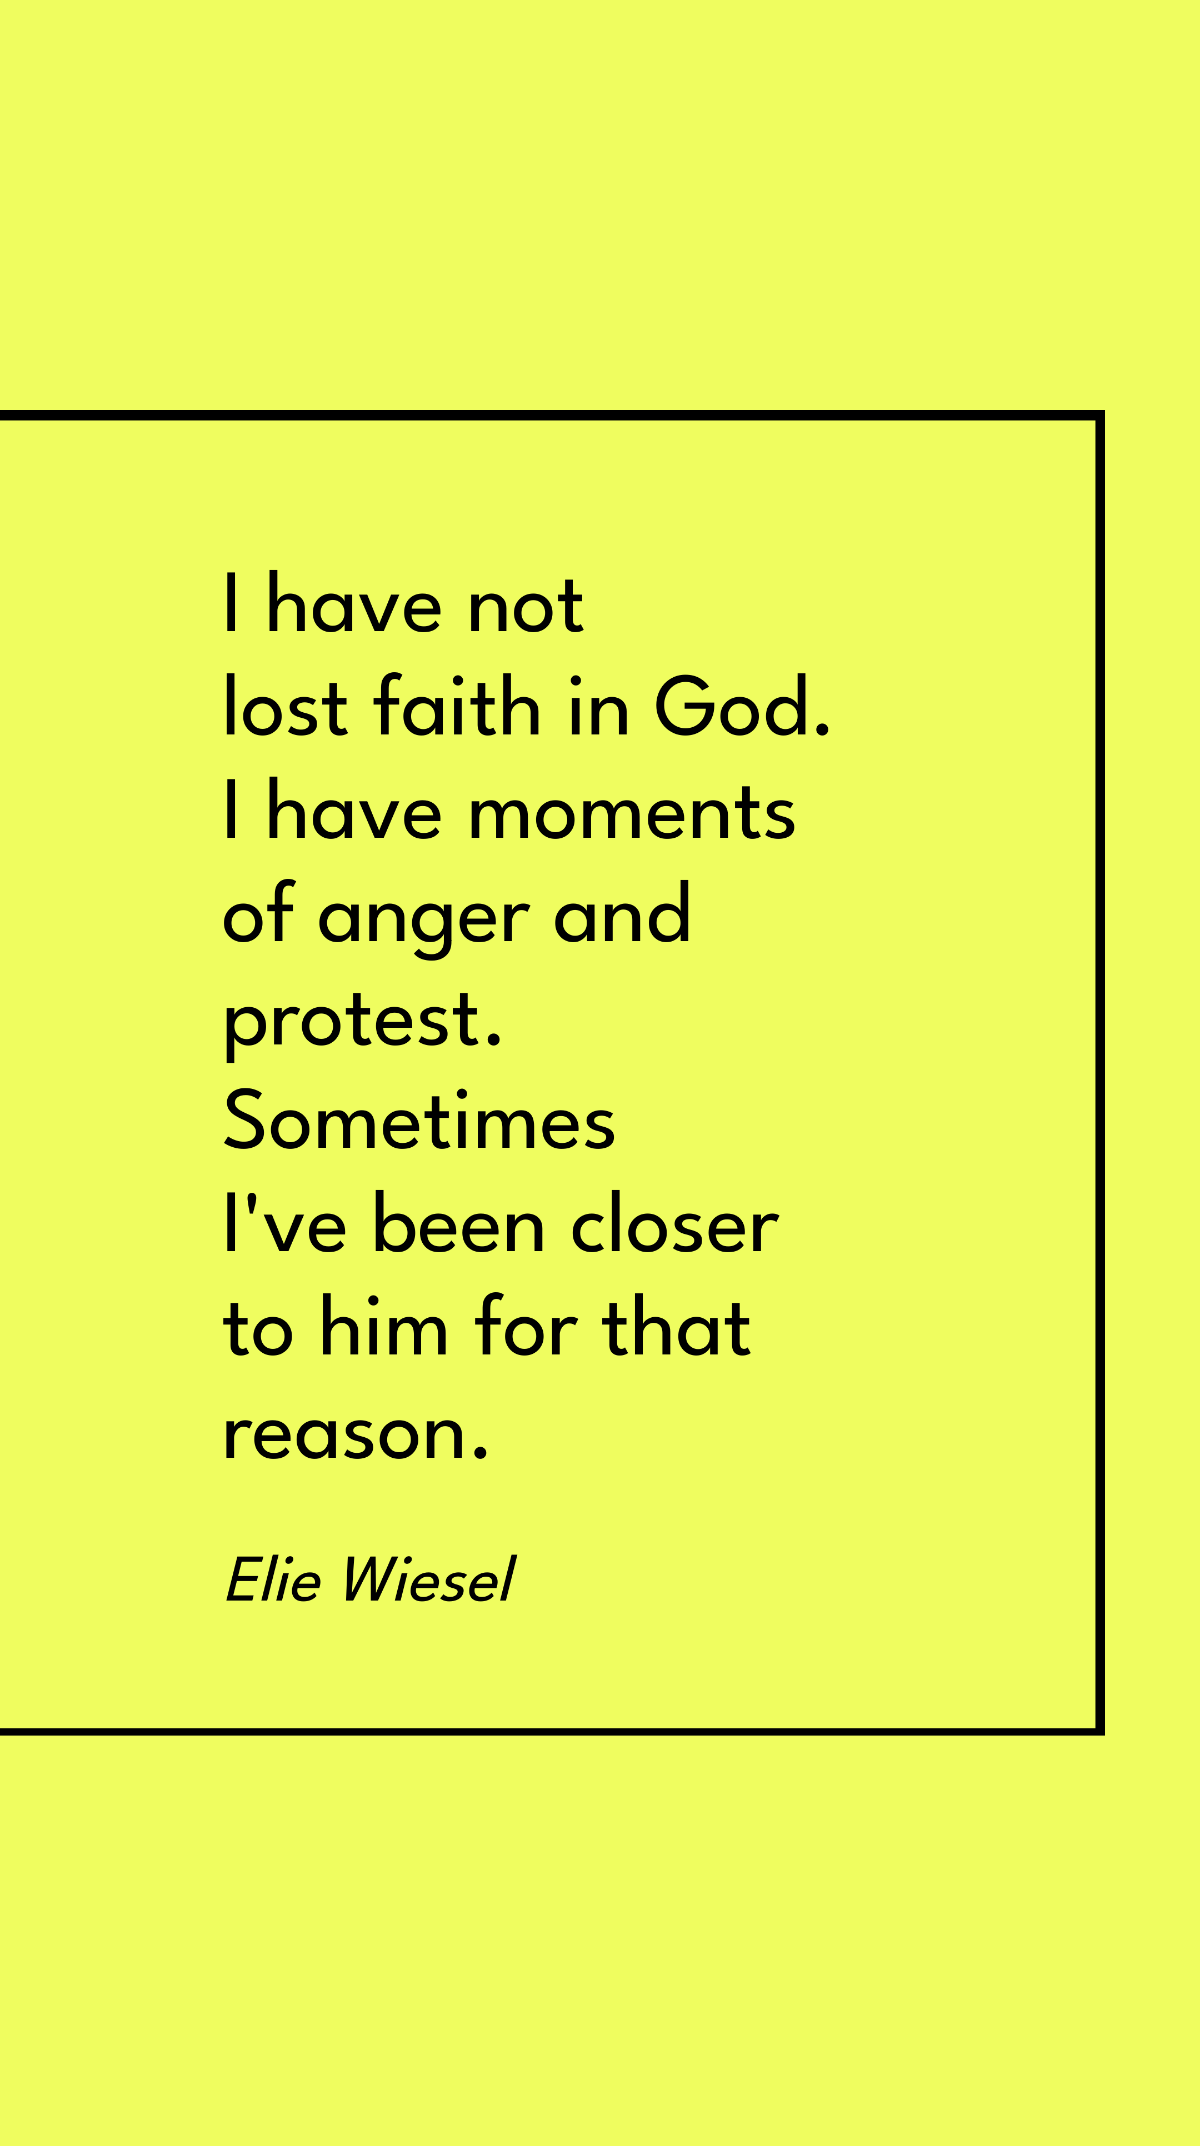 Elie Wiesel - I have not lost faith in God. I have moments of anger and protest. Sometimes I've been closer to him for that reason.